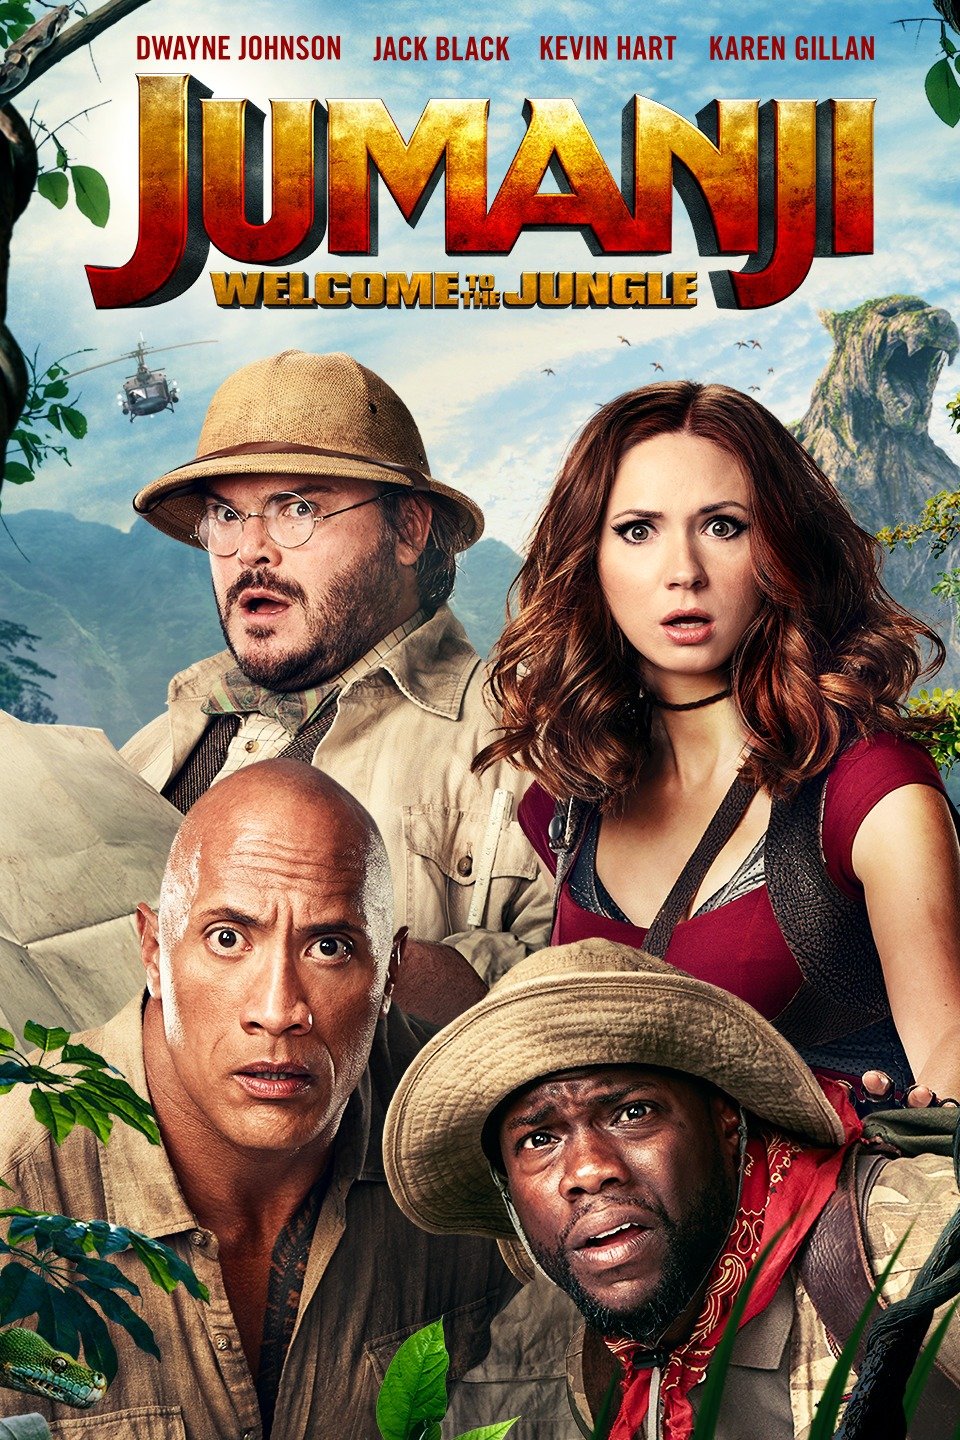 Jumanji: Welcome to the Jungle”: a mediocre action comedy – Spartan Shield